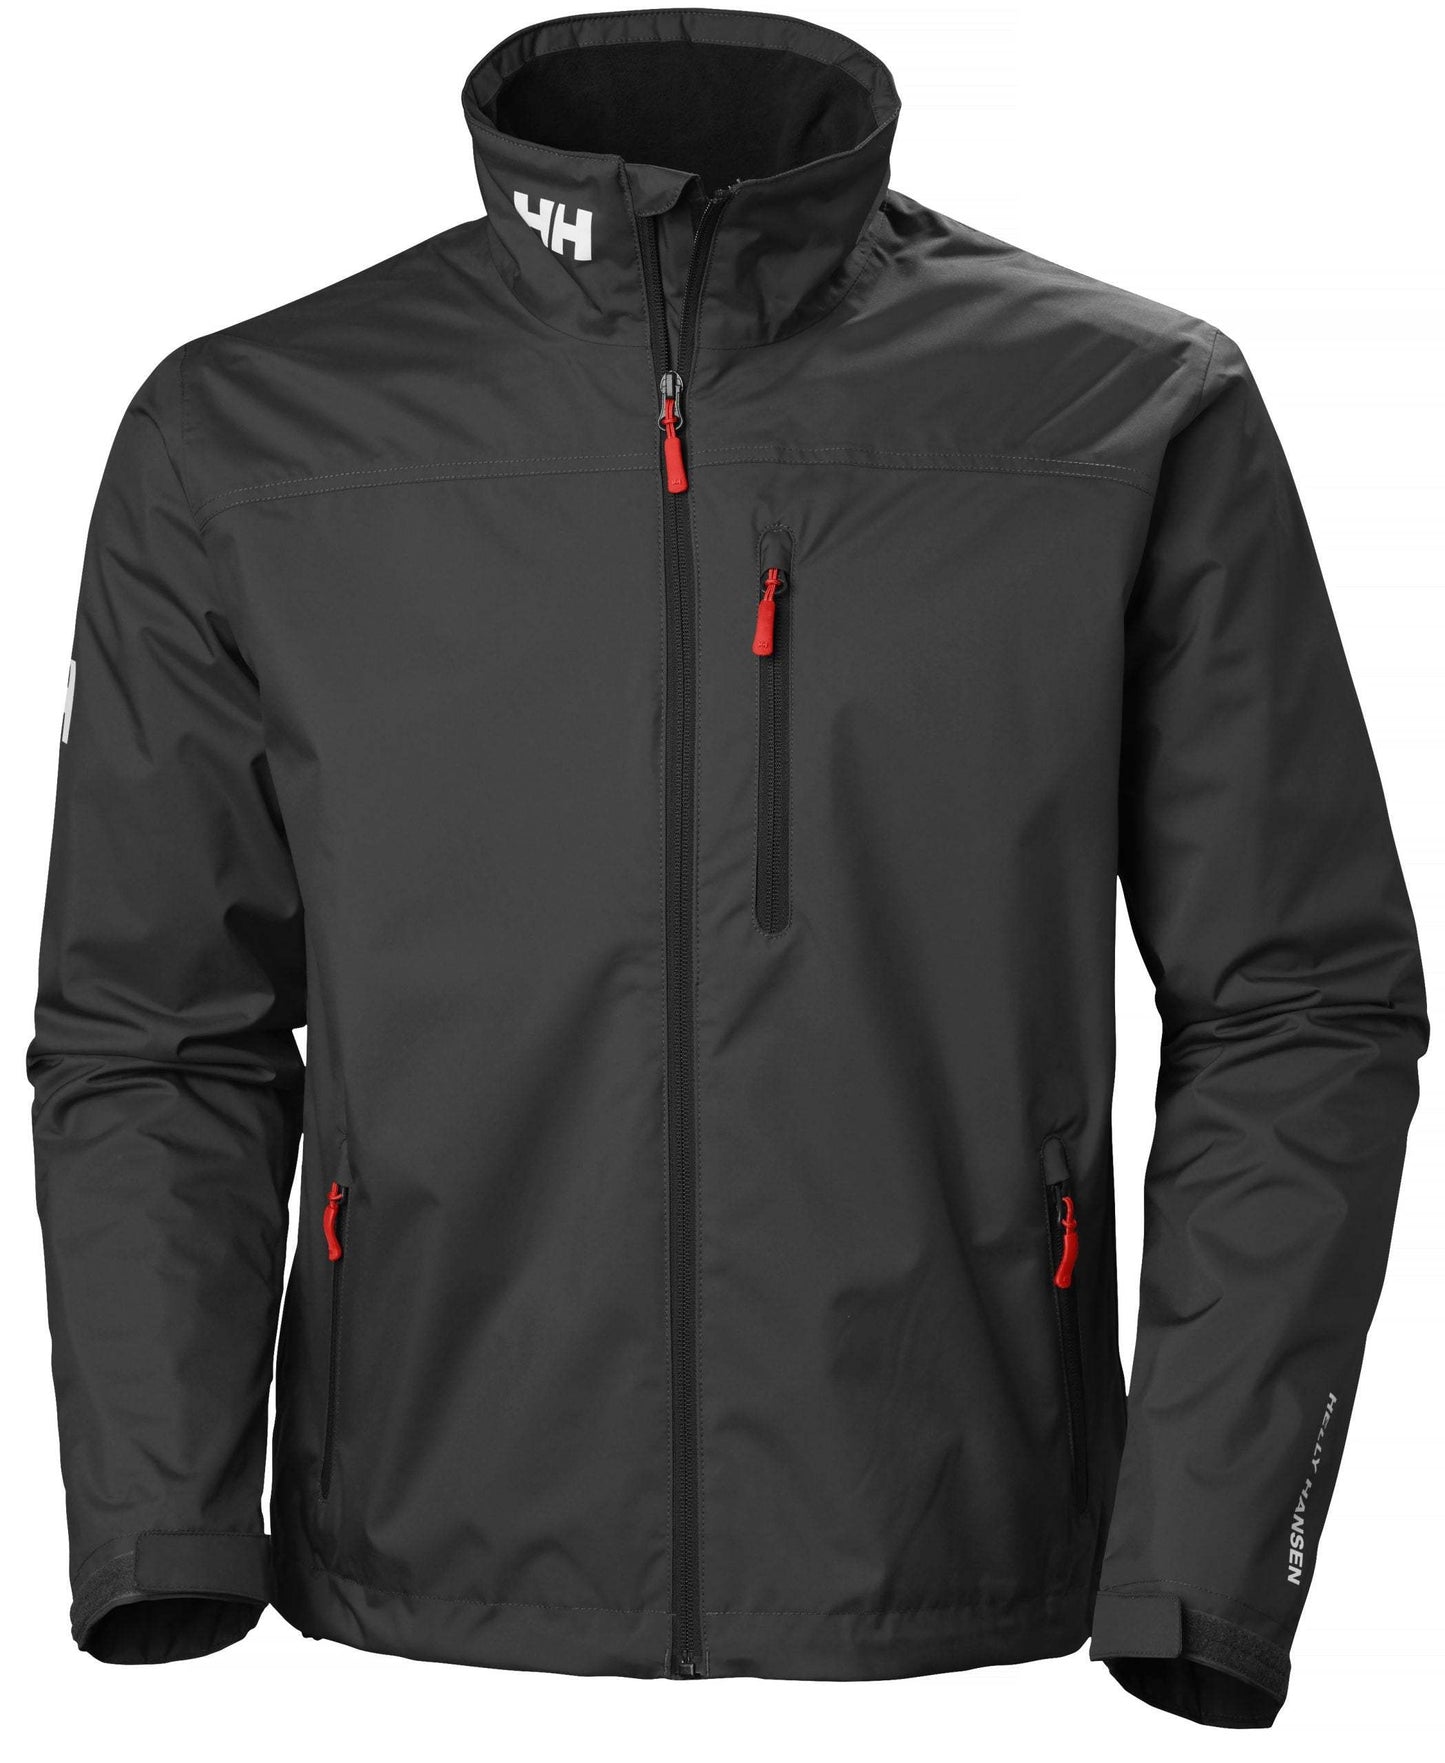 Crew Midlayer Jacket by Helly Hansen - The Luxury Promotional Gifts Company Limited